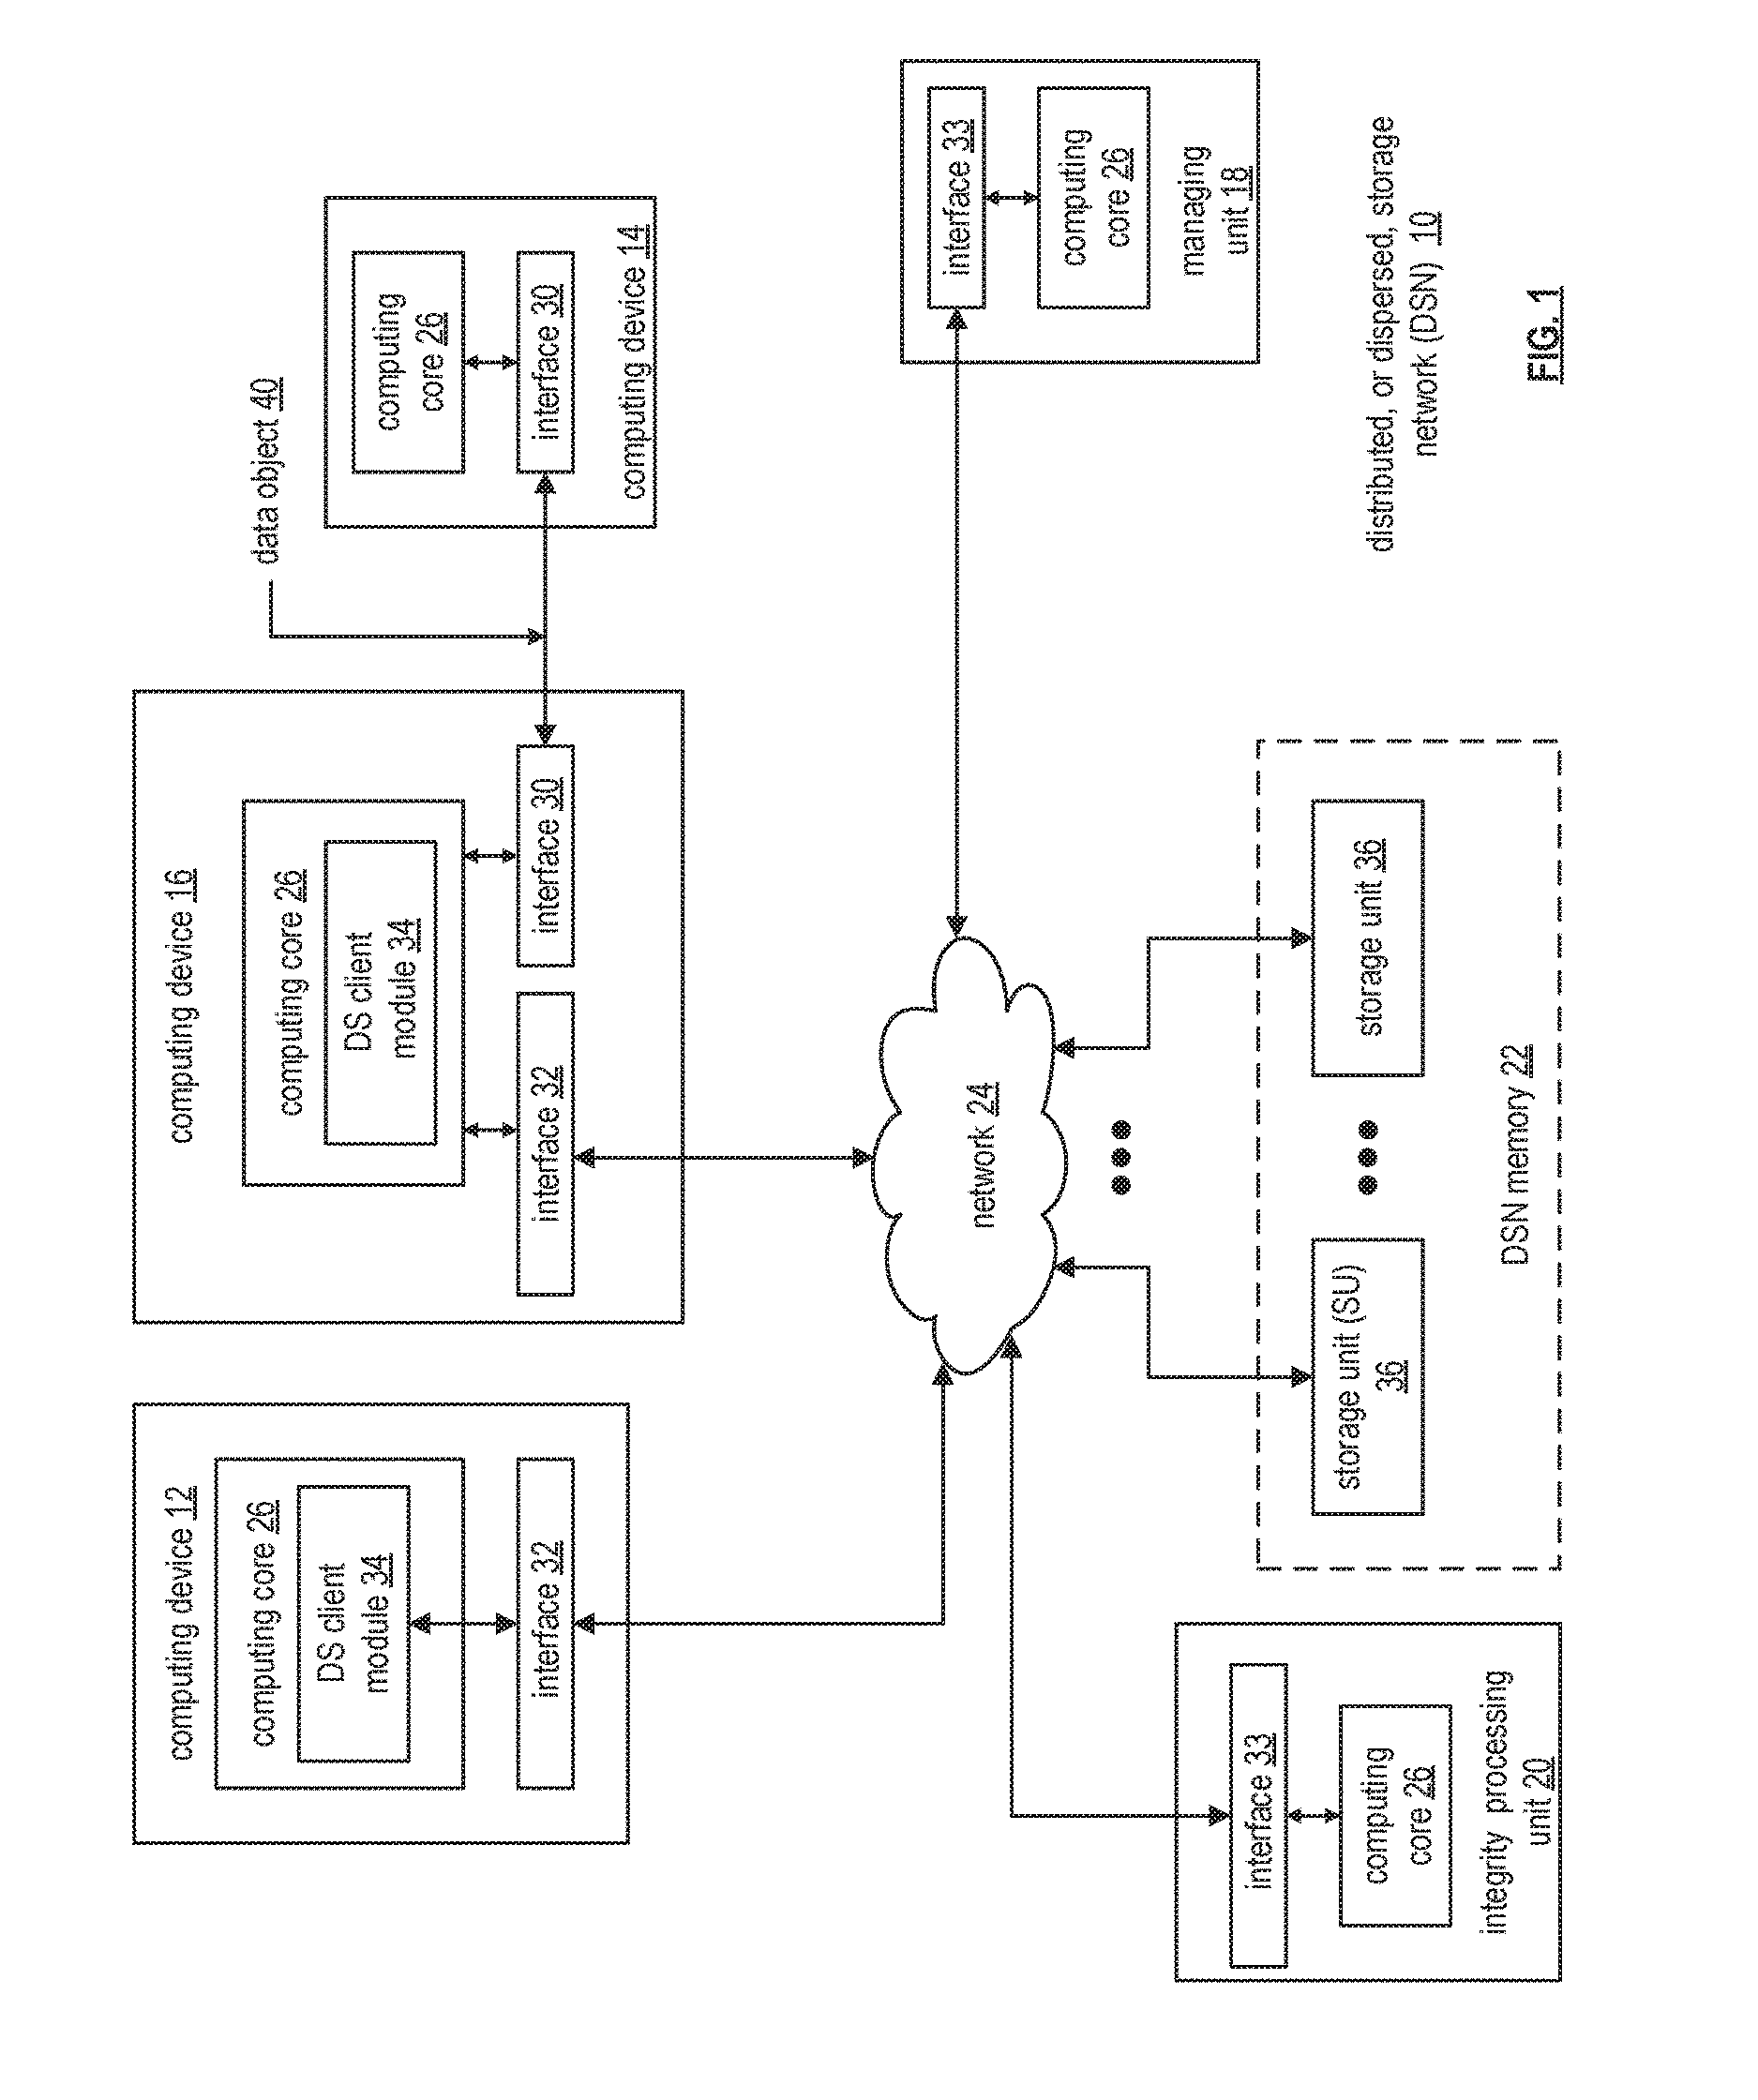 Using broadcast for parallelized and rapid slice replication in a dispersed storage network